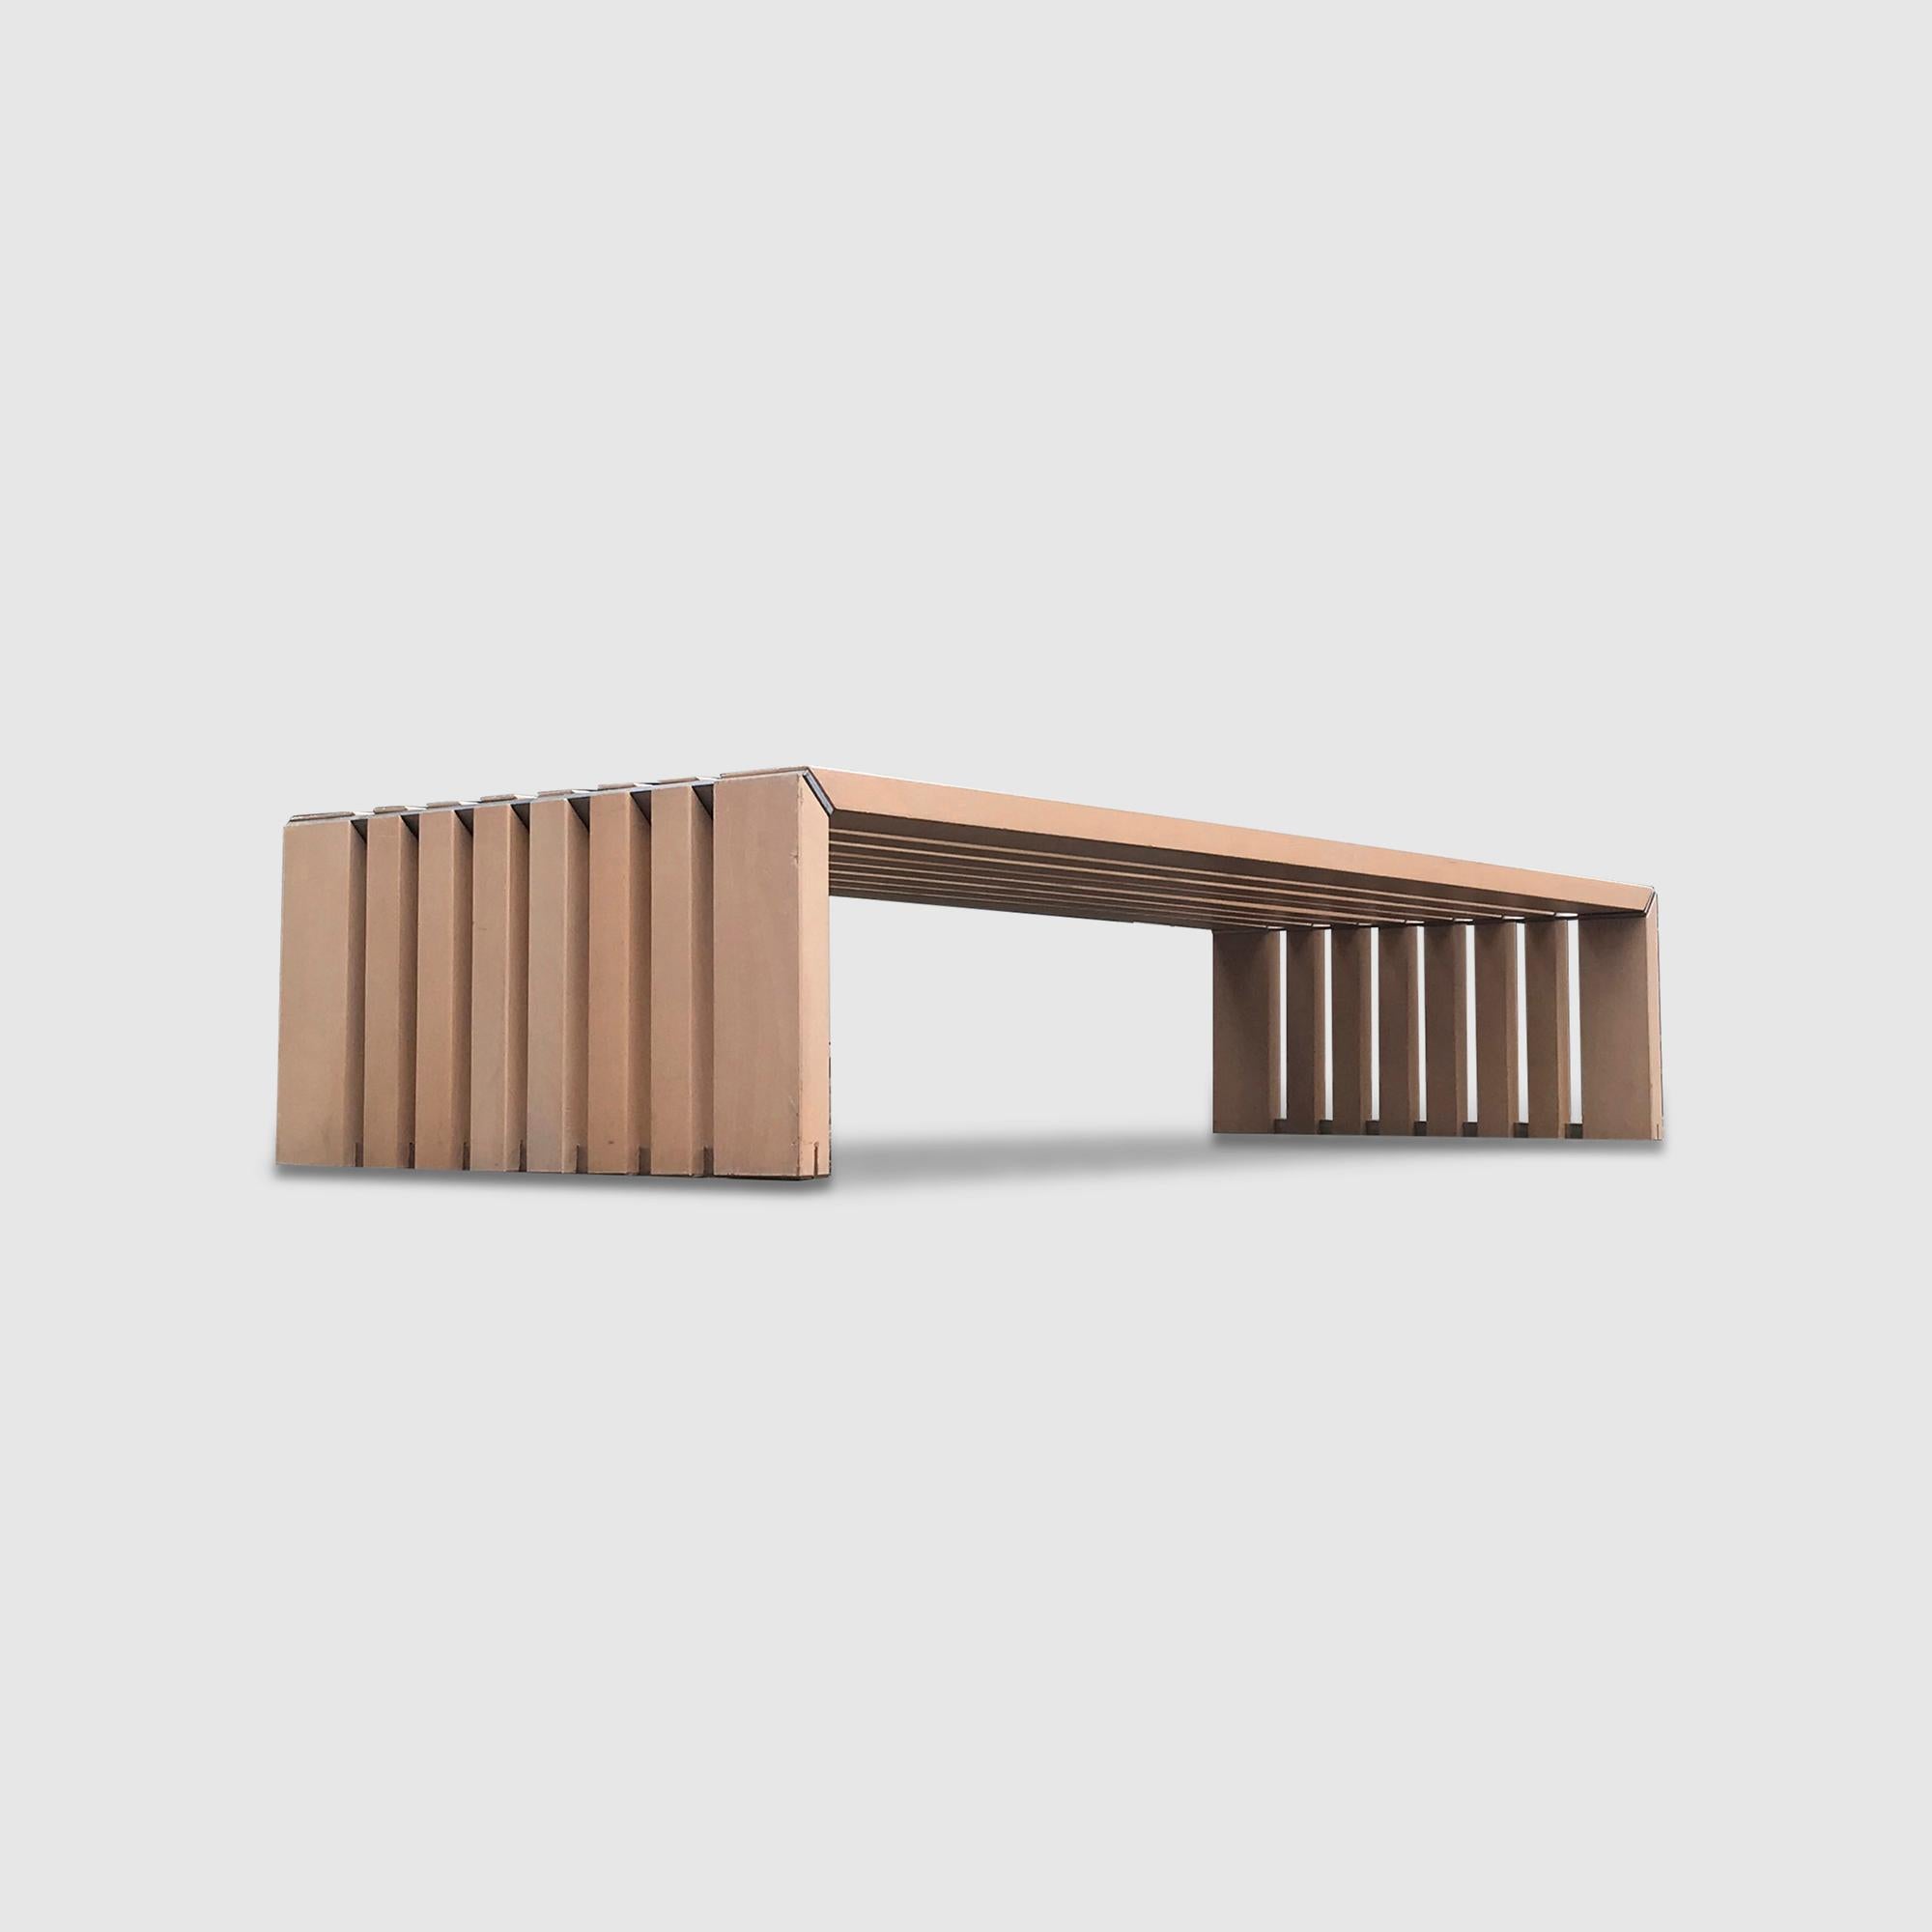 Passe Partout slatted ash bench by Walter Antonis for Arspect 1970s For Sale 2